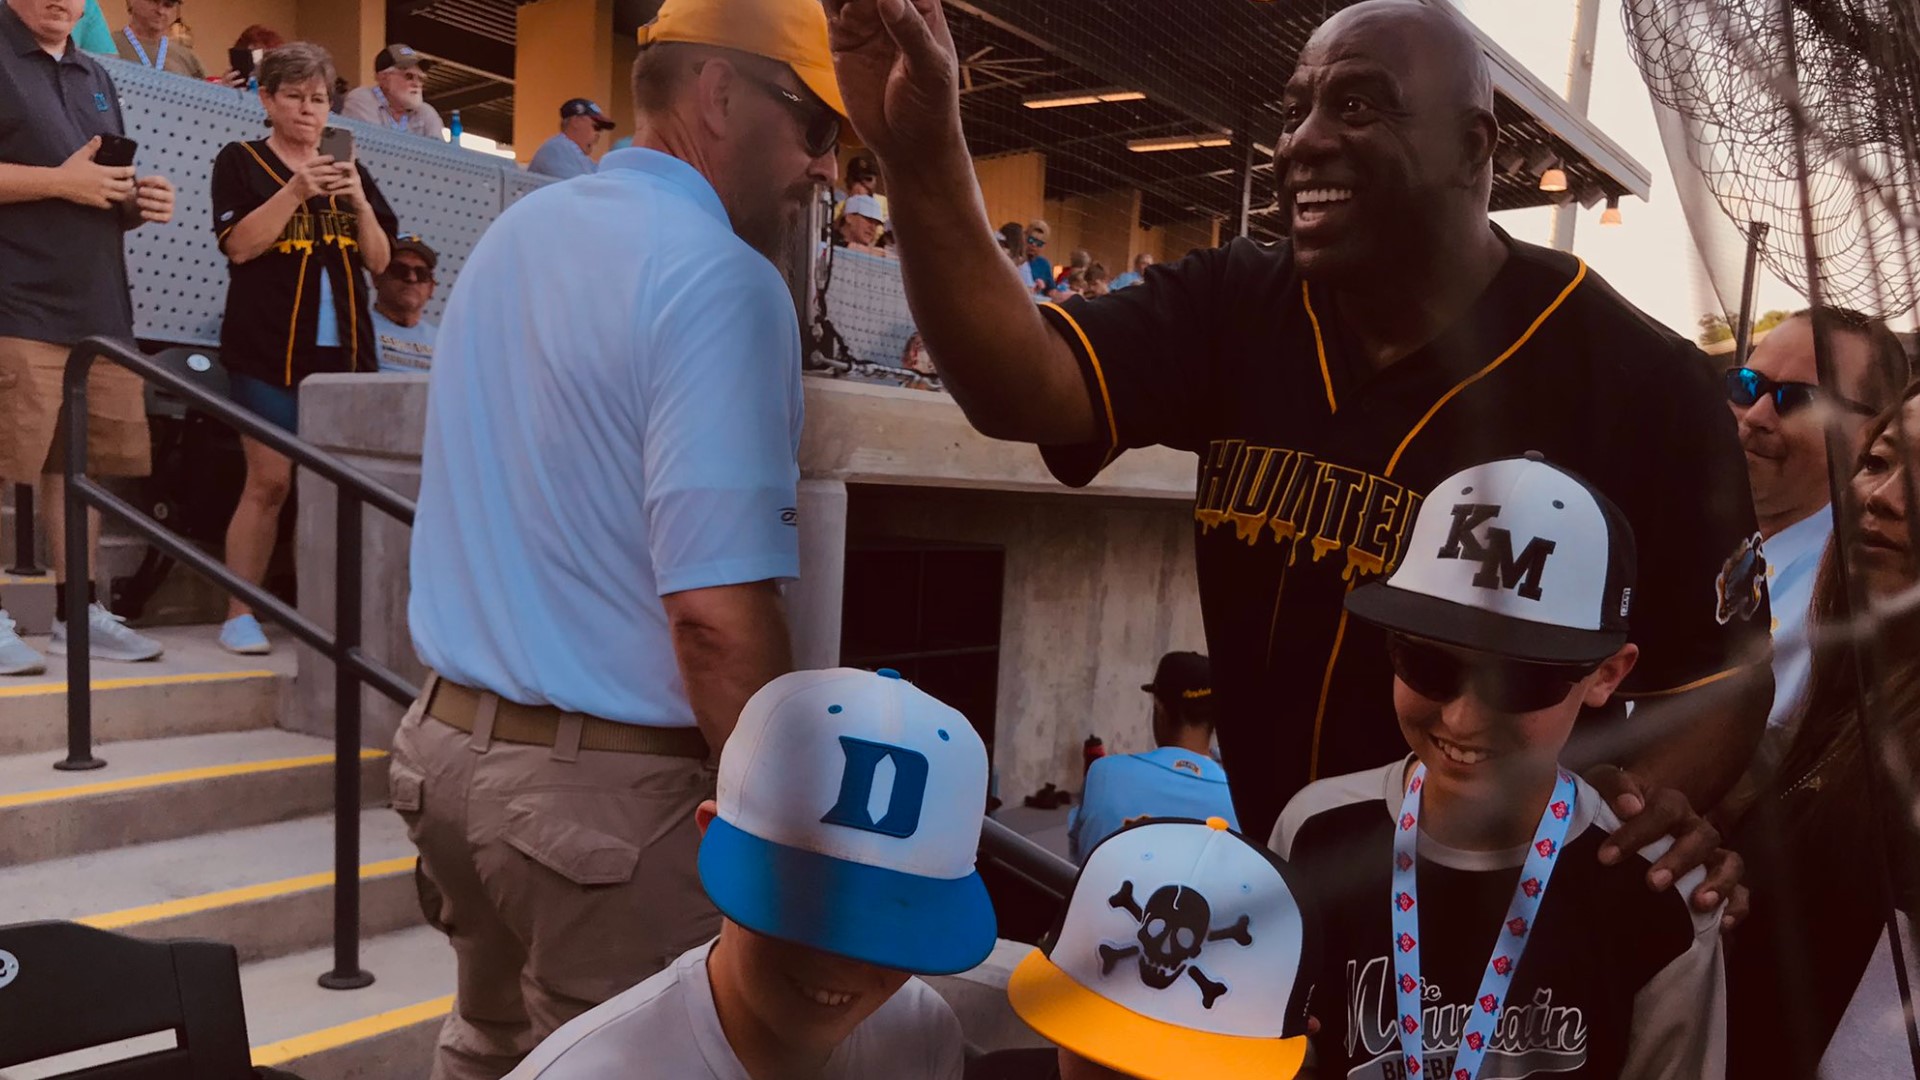 The Gastonia Honey Hunters are ready to start their inaugural season on Thursday, May 27, and they brought in a special guest to swing into action.